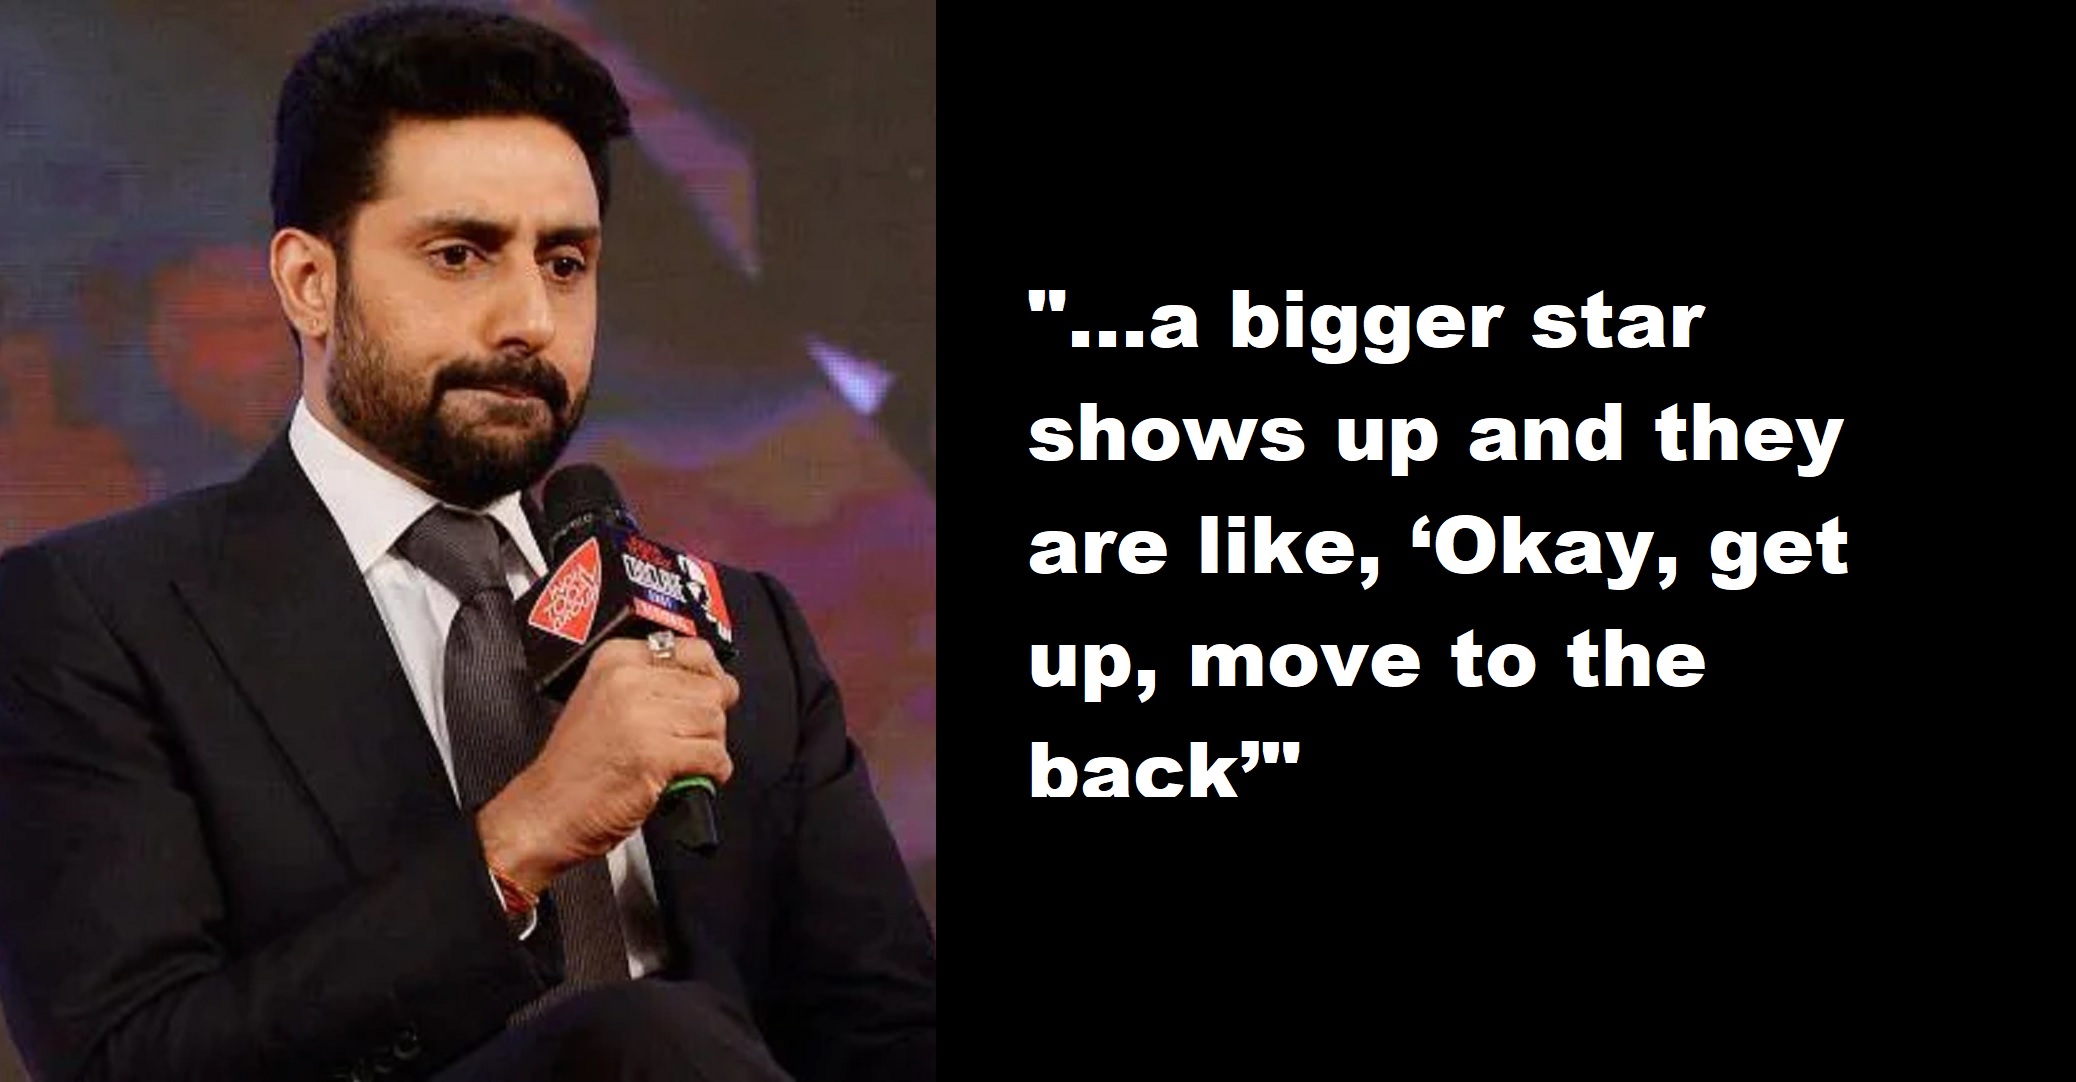 Abhishek Bachchan Talks About His Struggle In Bollywood, Was Asked To Vacate Front Row Seat For ‘Bigger Star’